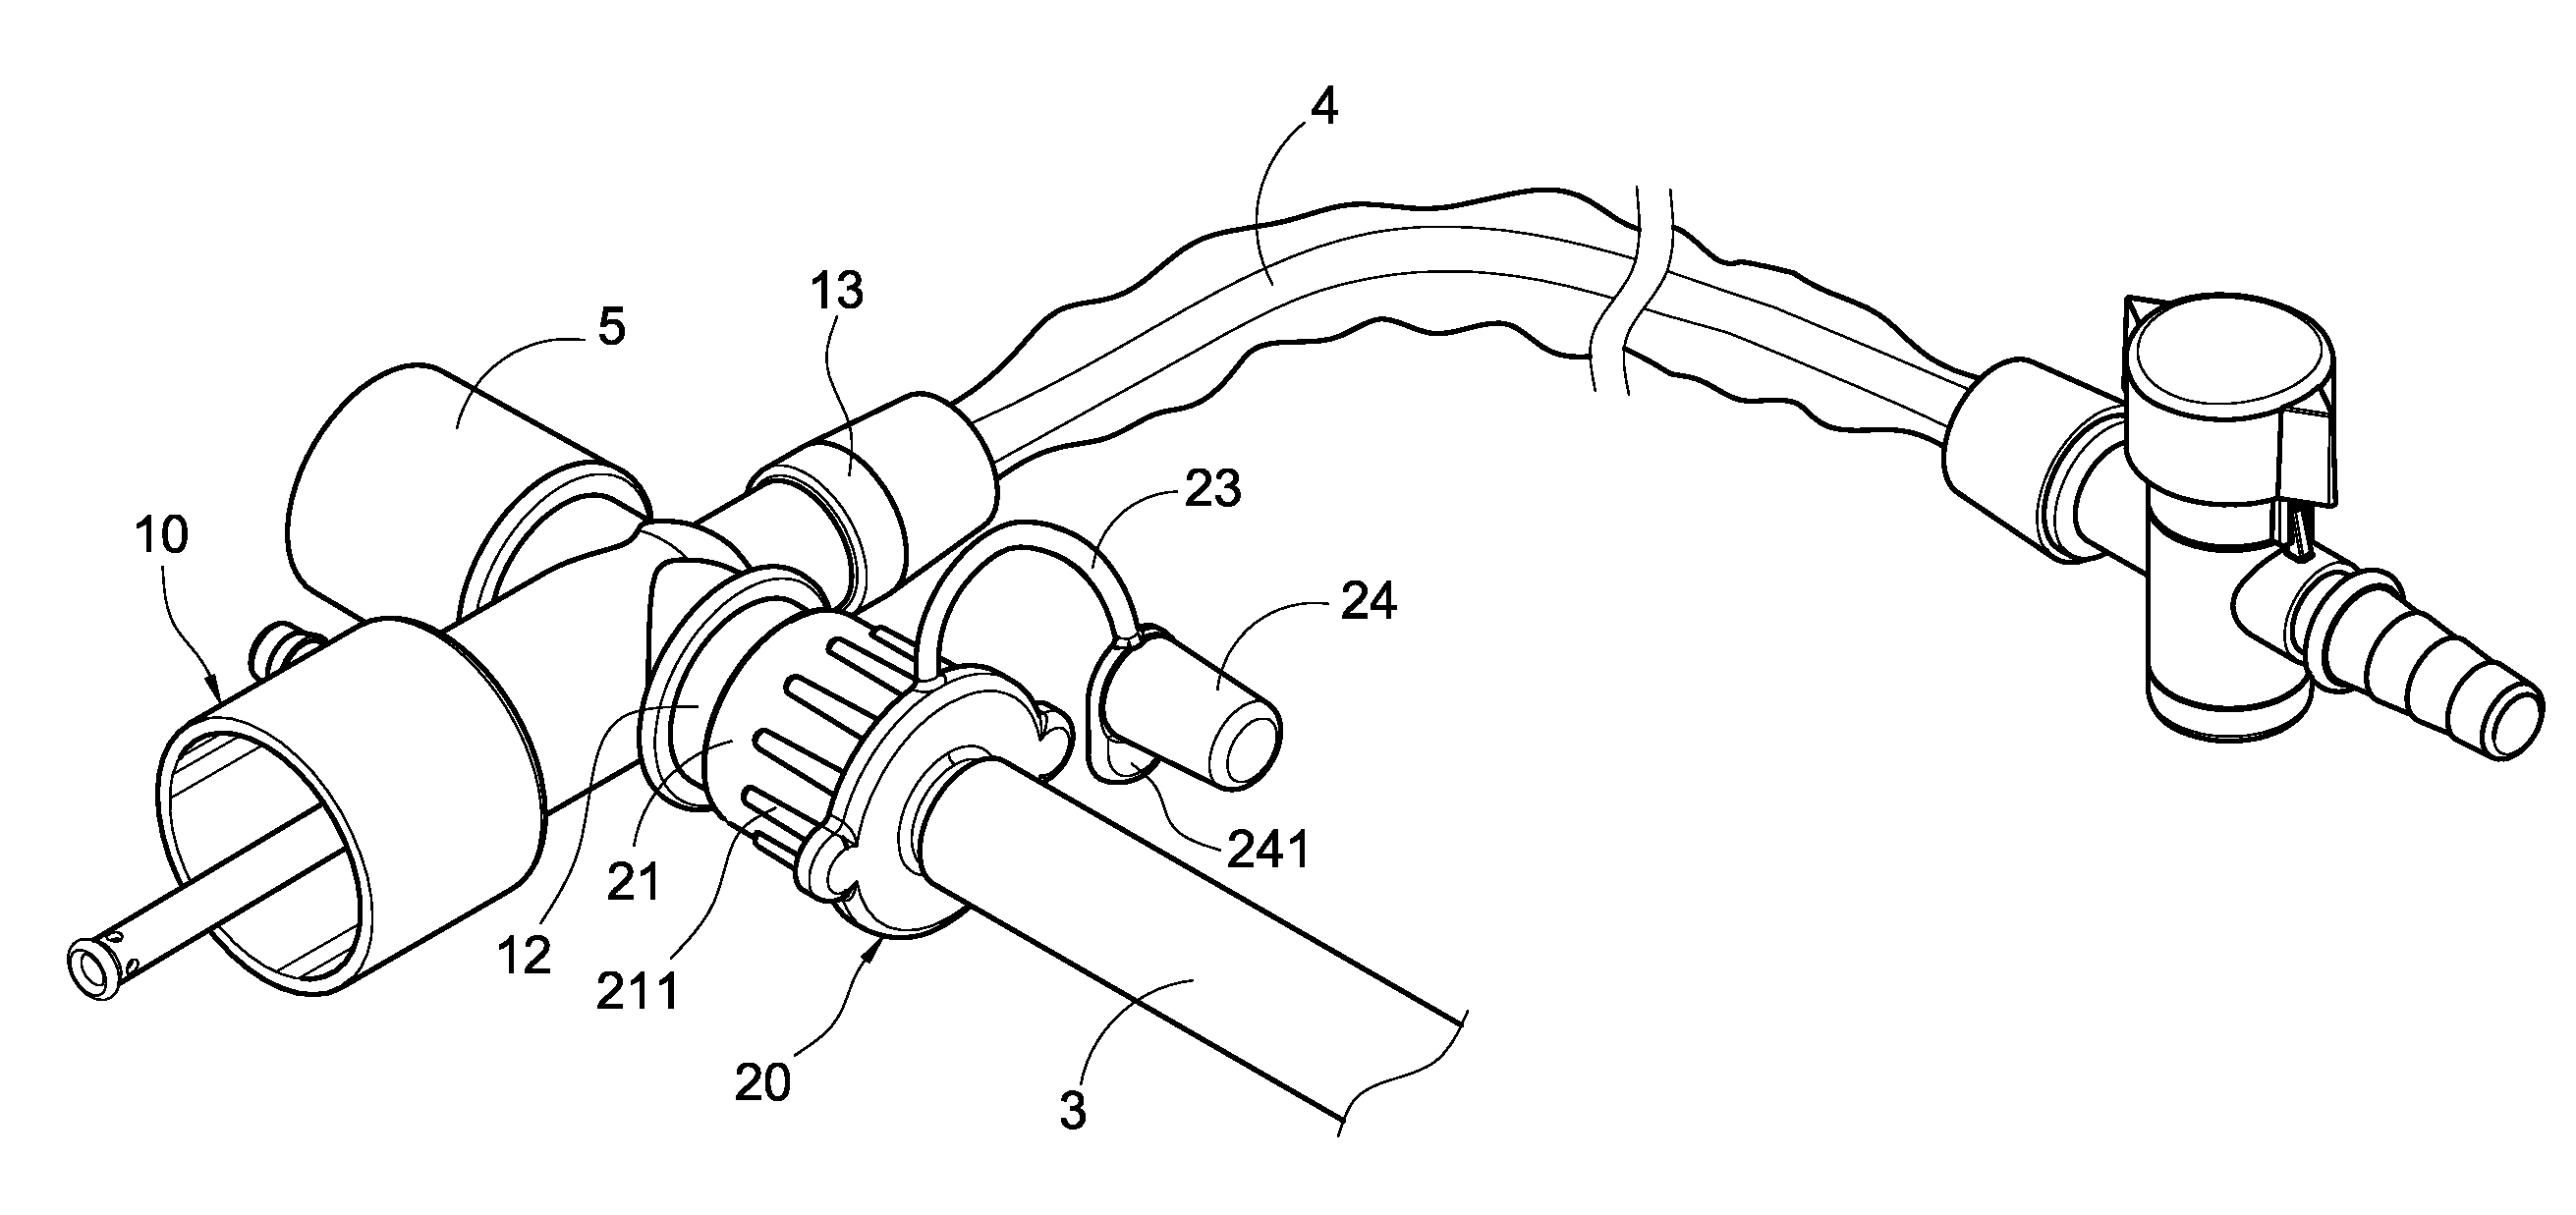 Air Line Adapter Structure Of Suction Apparatus